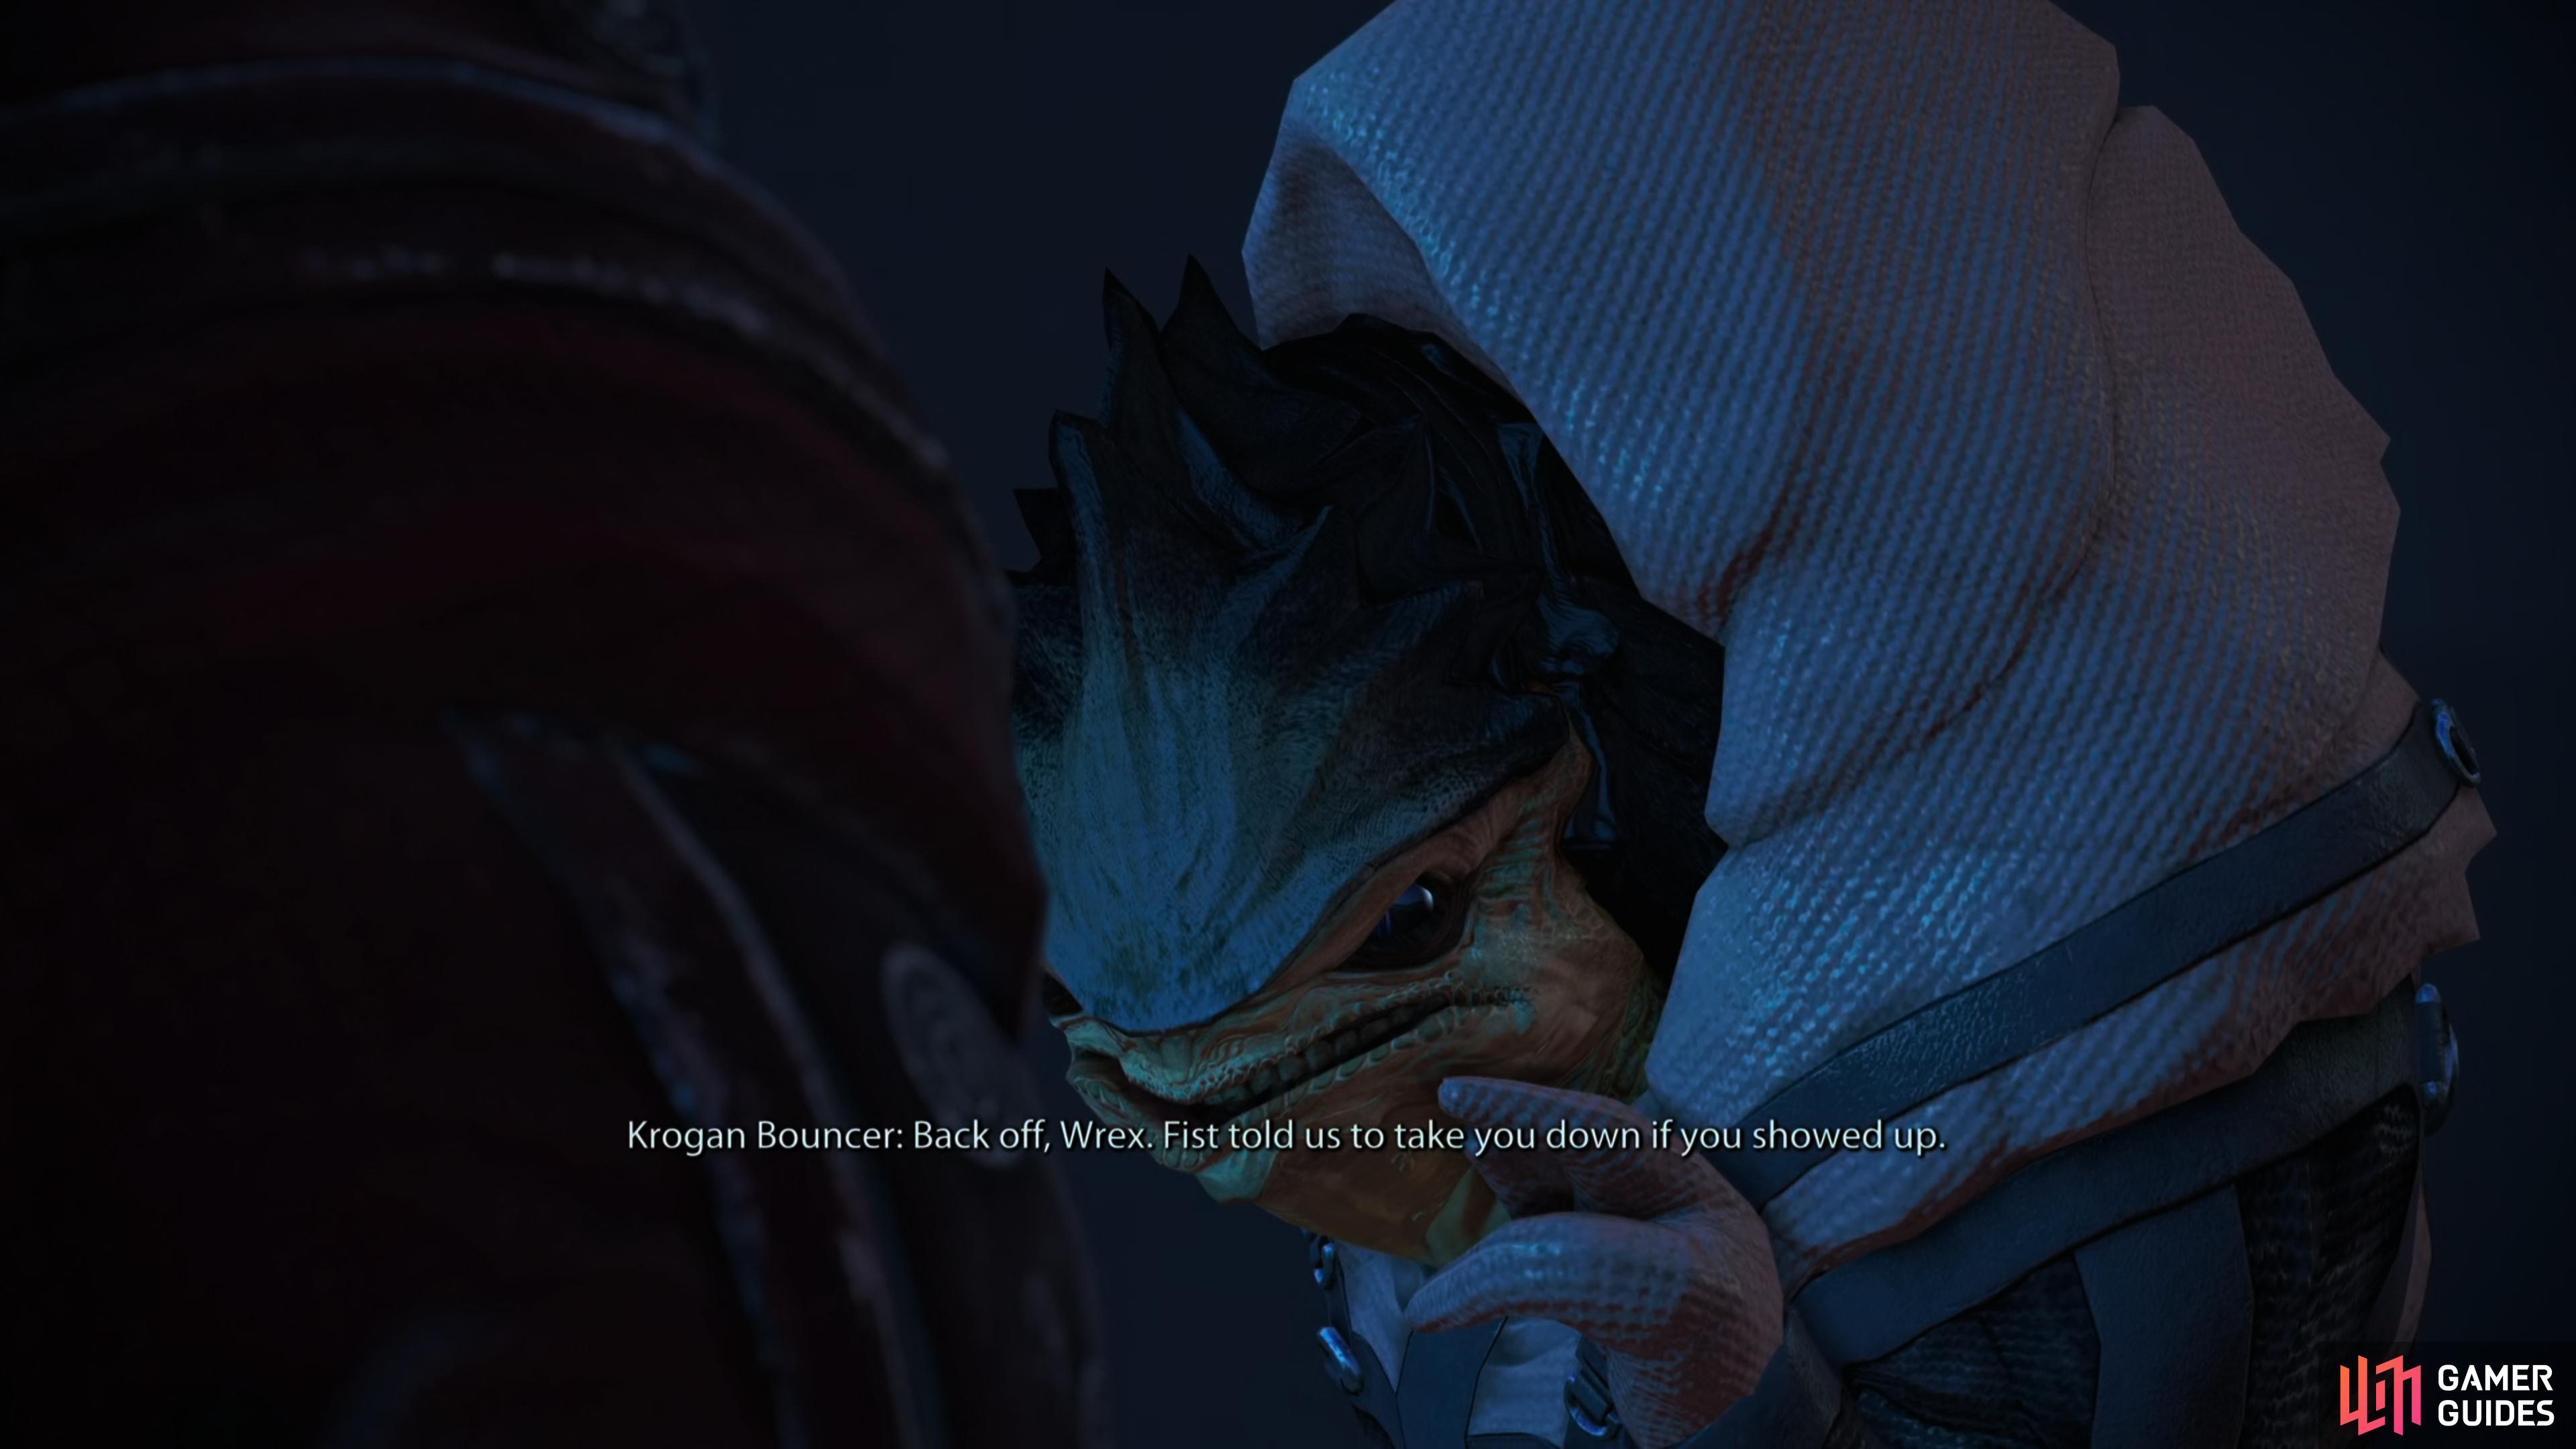 or you can find Wrex making threats at Chora's Den.